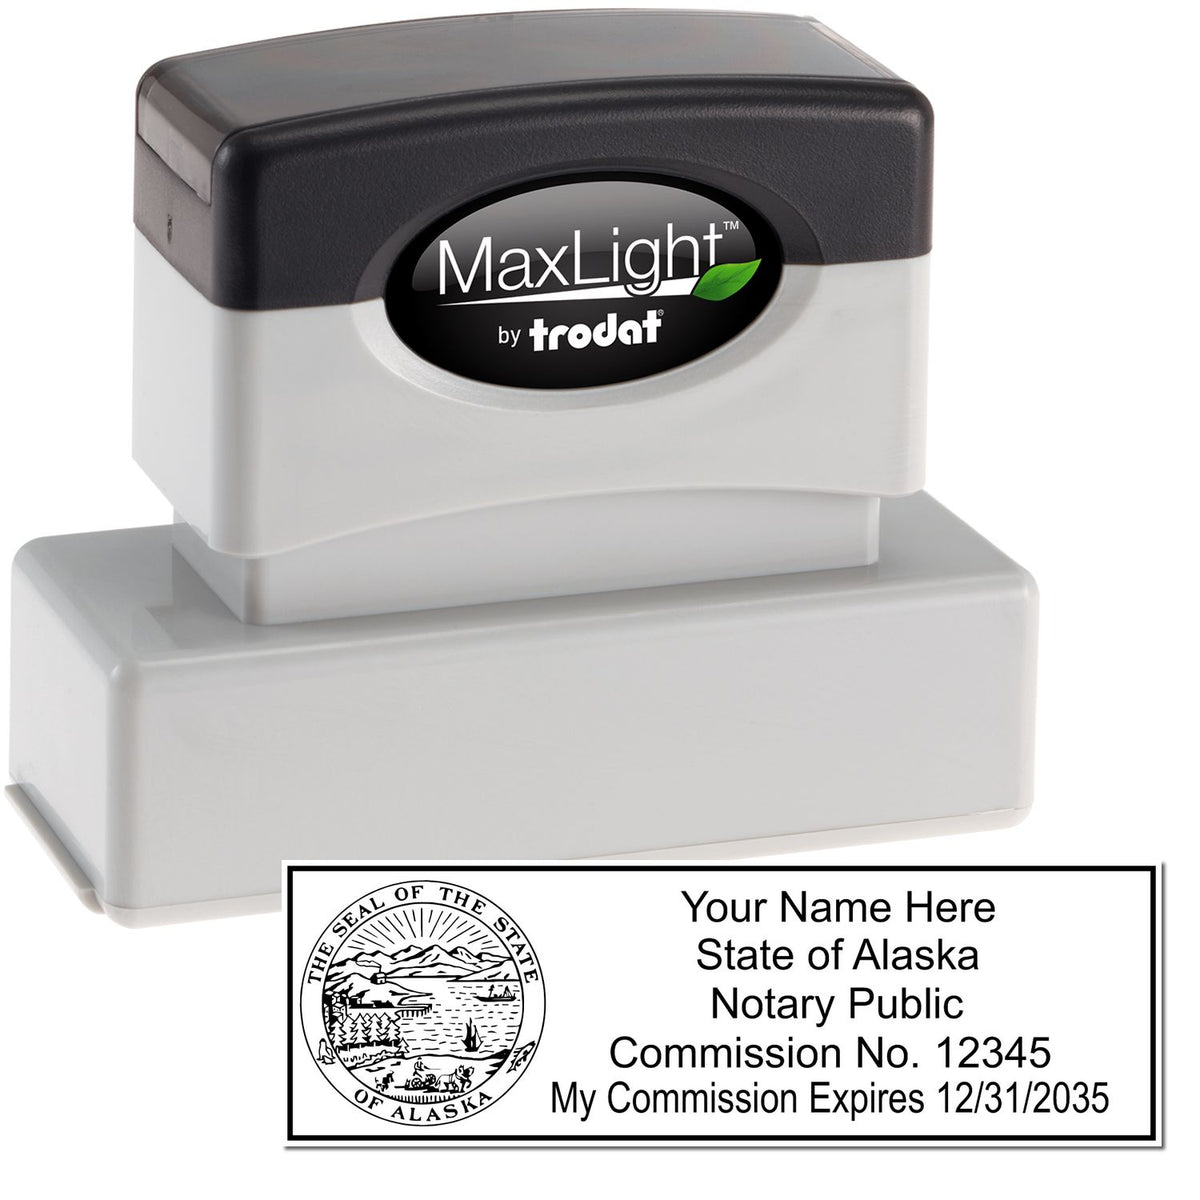 The main image for the MaxLight Premium Pre-Inked Alaska State Seal Notarial Stamp depicting a sample of the imprint and electronic files